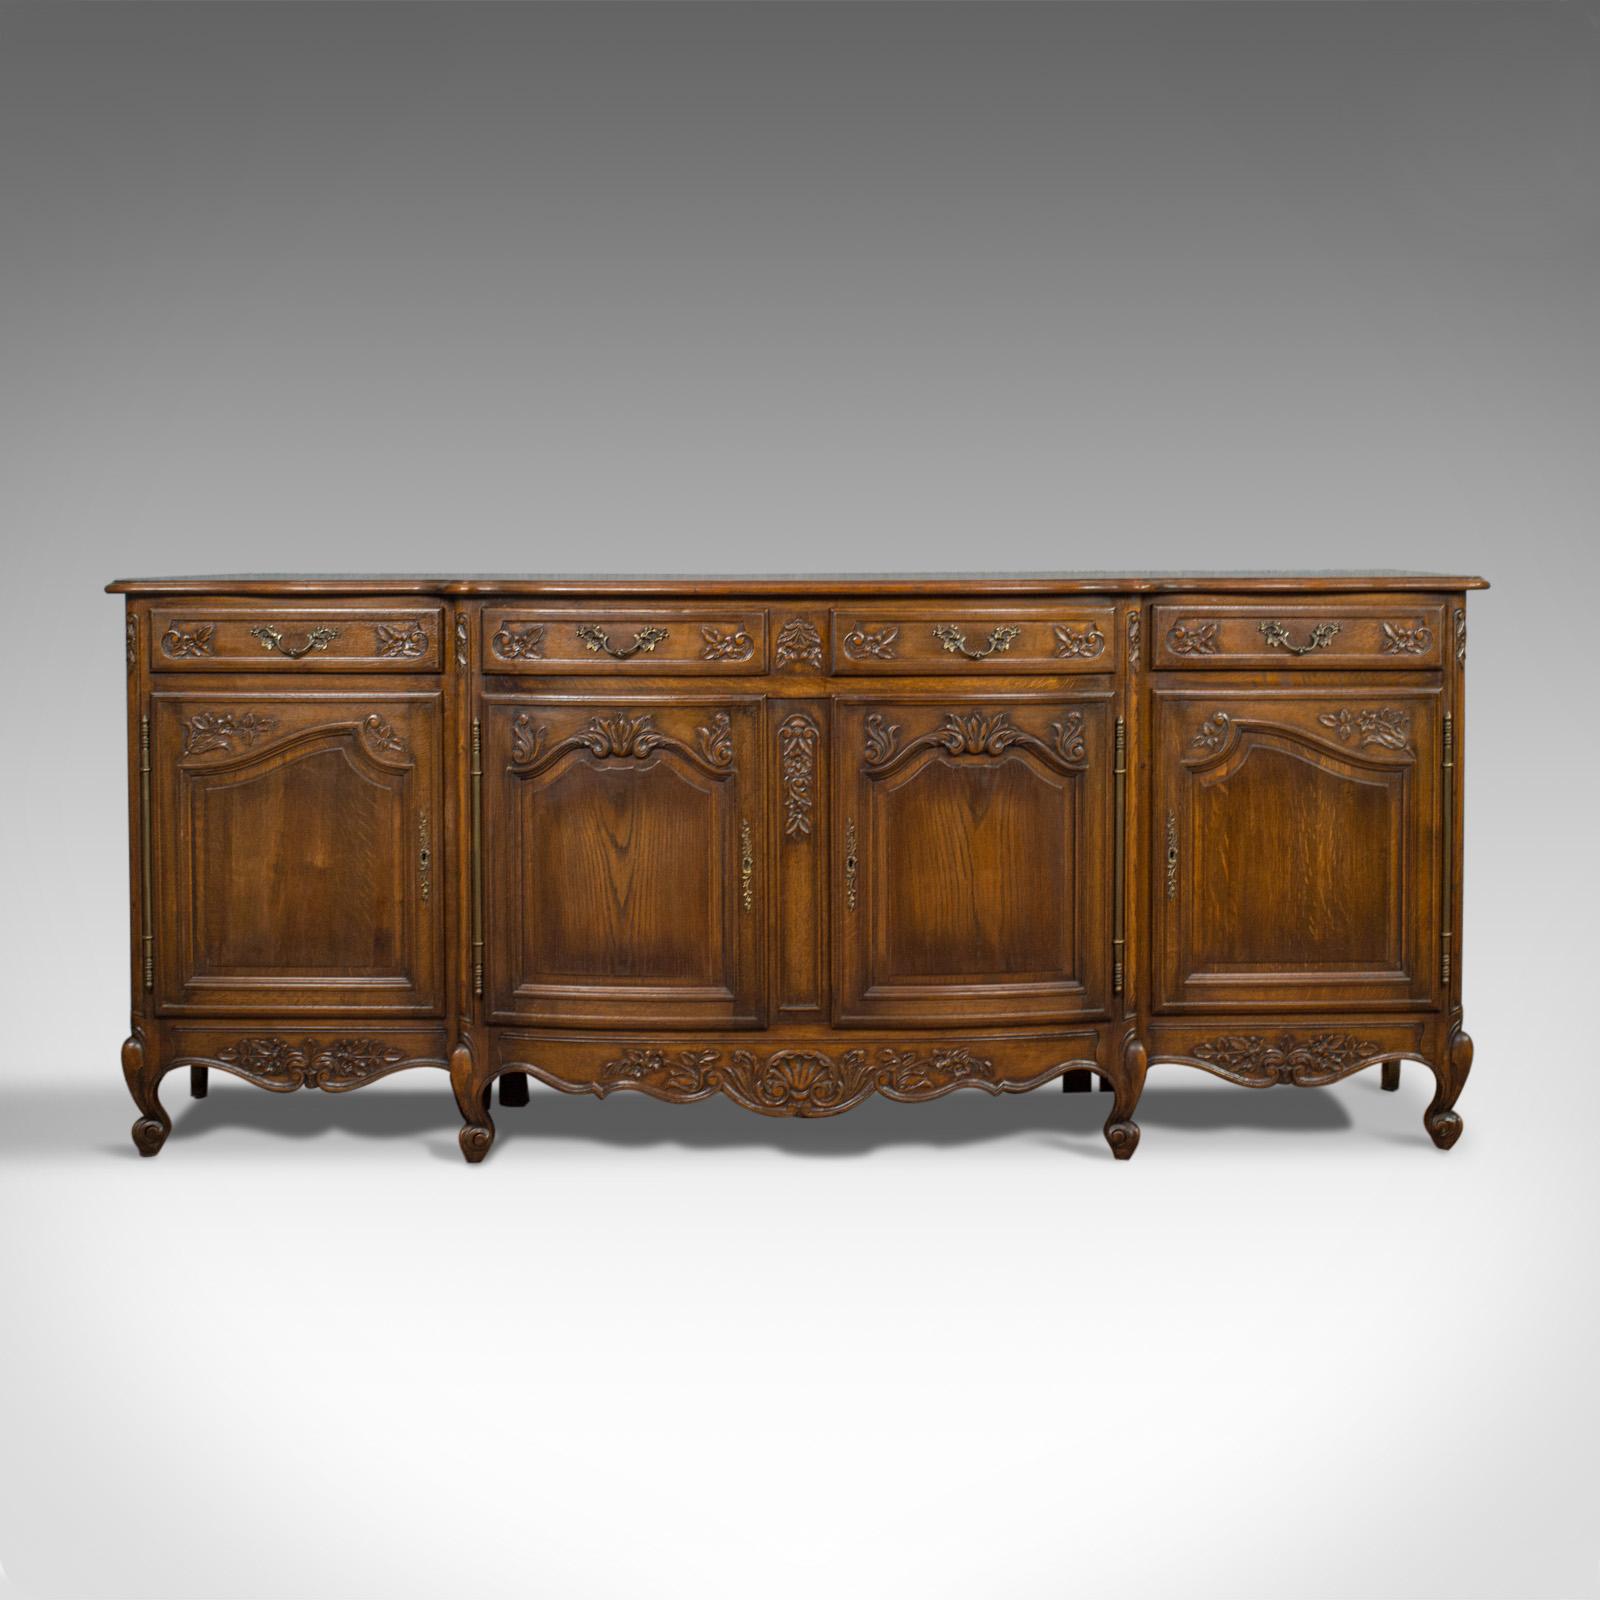 This is a large antique sideboard. A French, bow-fronted oak buffet cabinet of country house proportions at over 8 feet long, dating to the late 19th century, circa 1900.

Select oak displays warm caramel hues in a wax polished finish
Fine grain